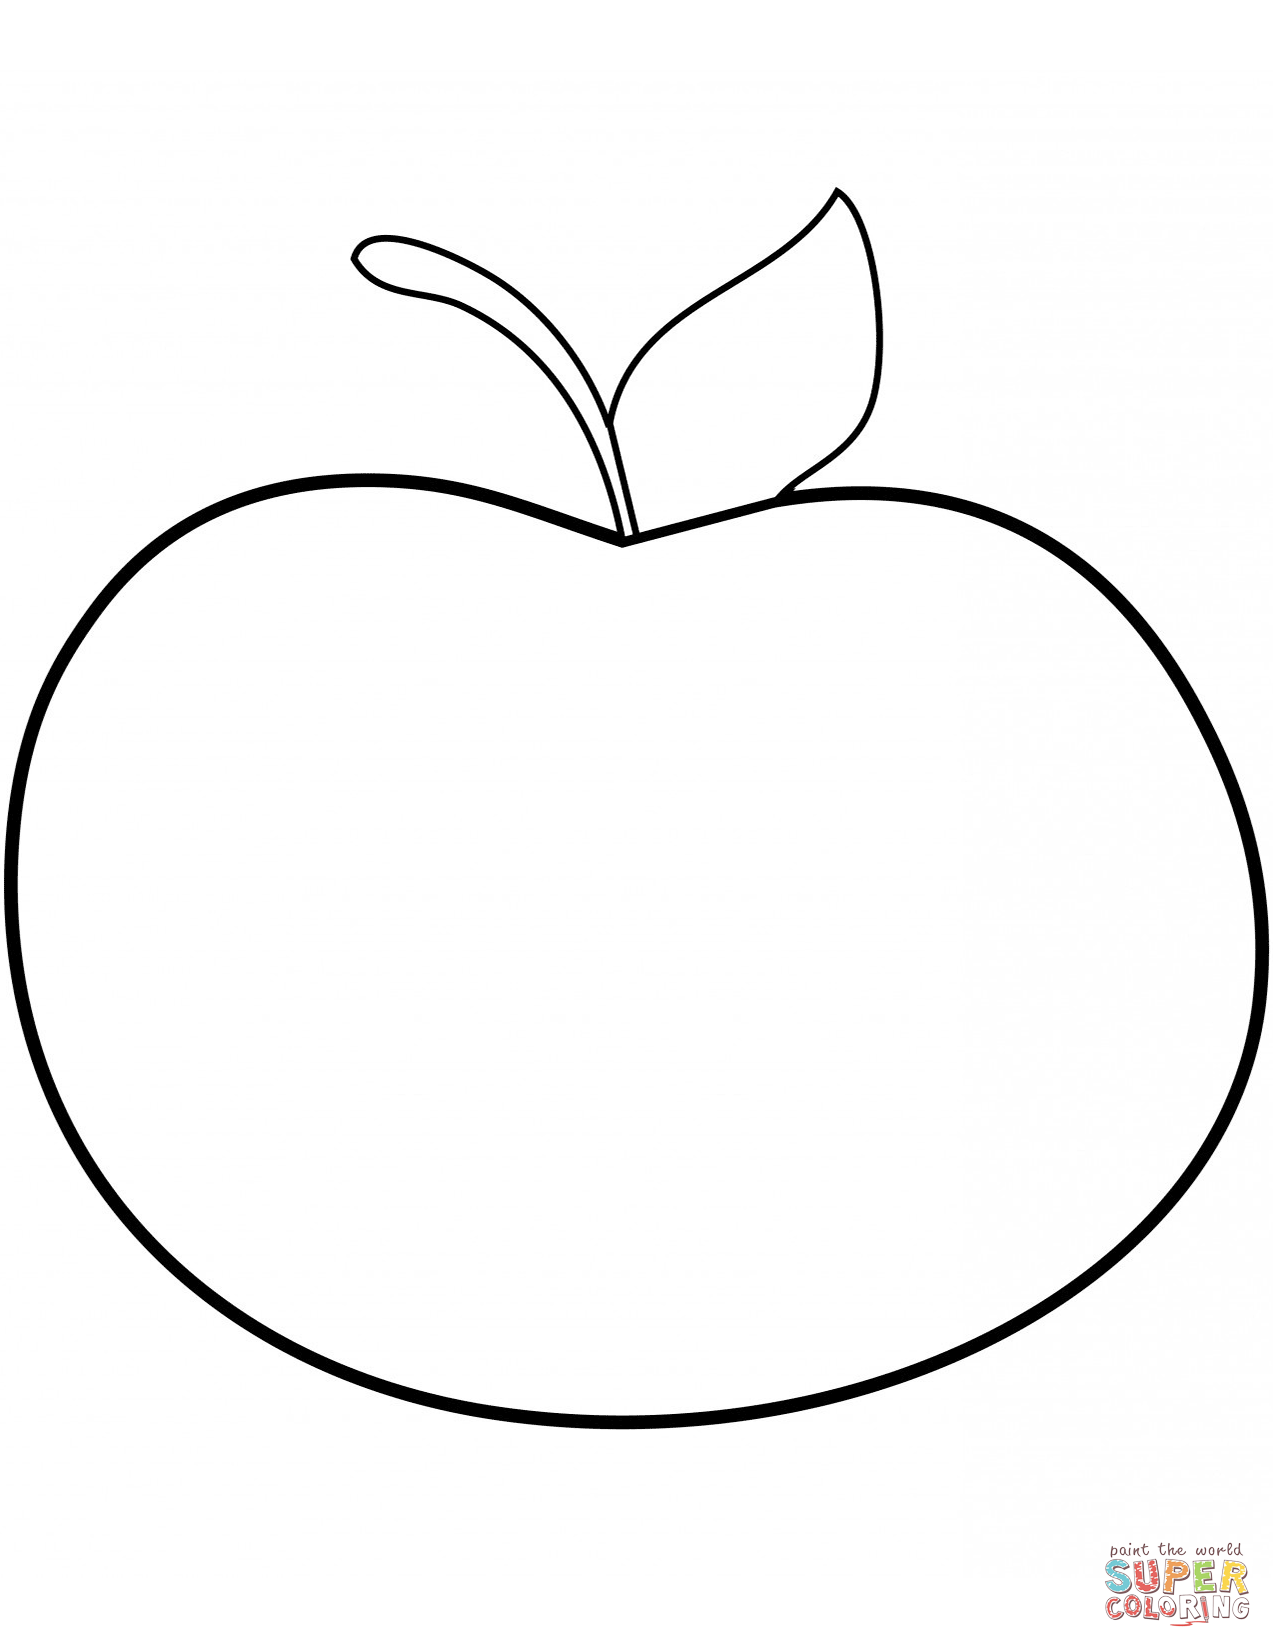 Download Apple Logo Coloring Pages at GetColorings.com | Free printable colorings pages to print and color